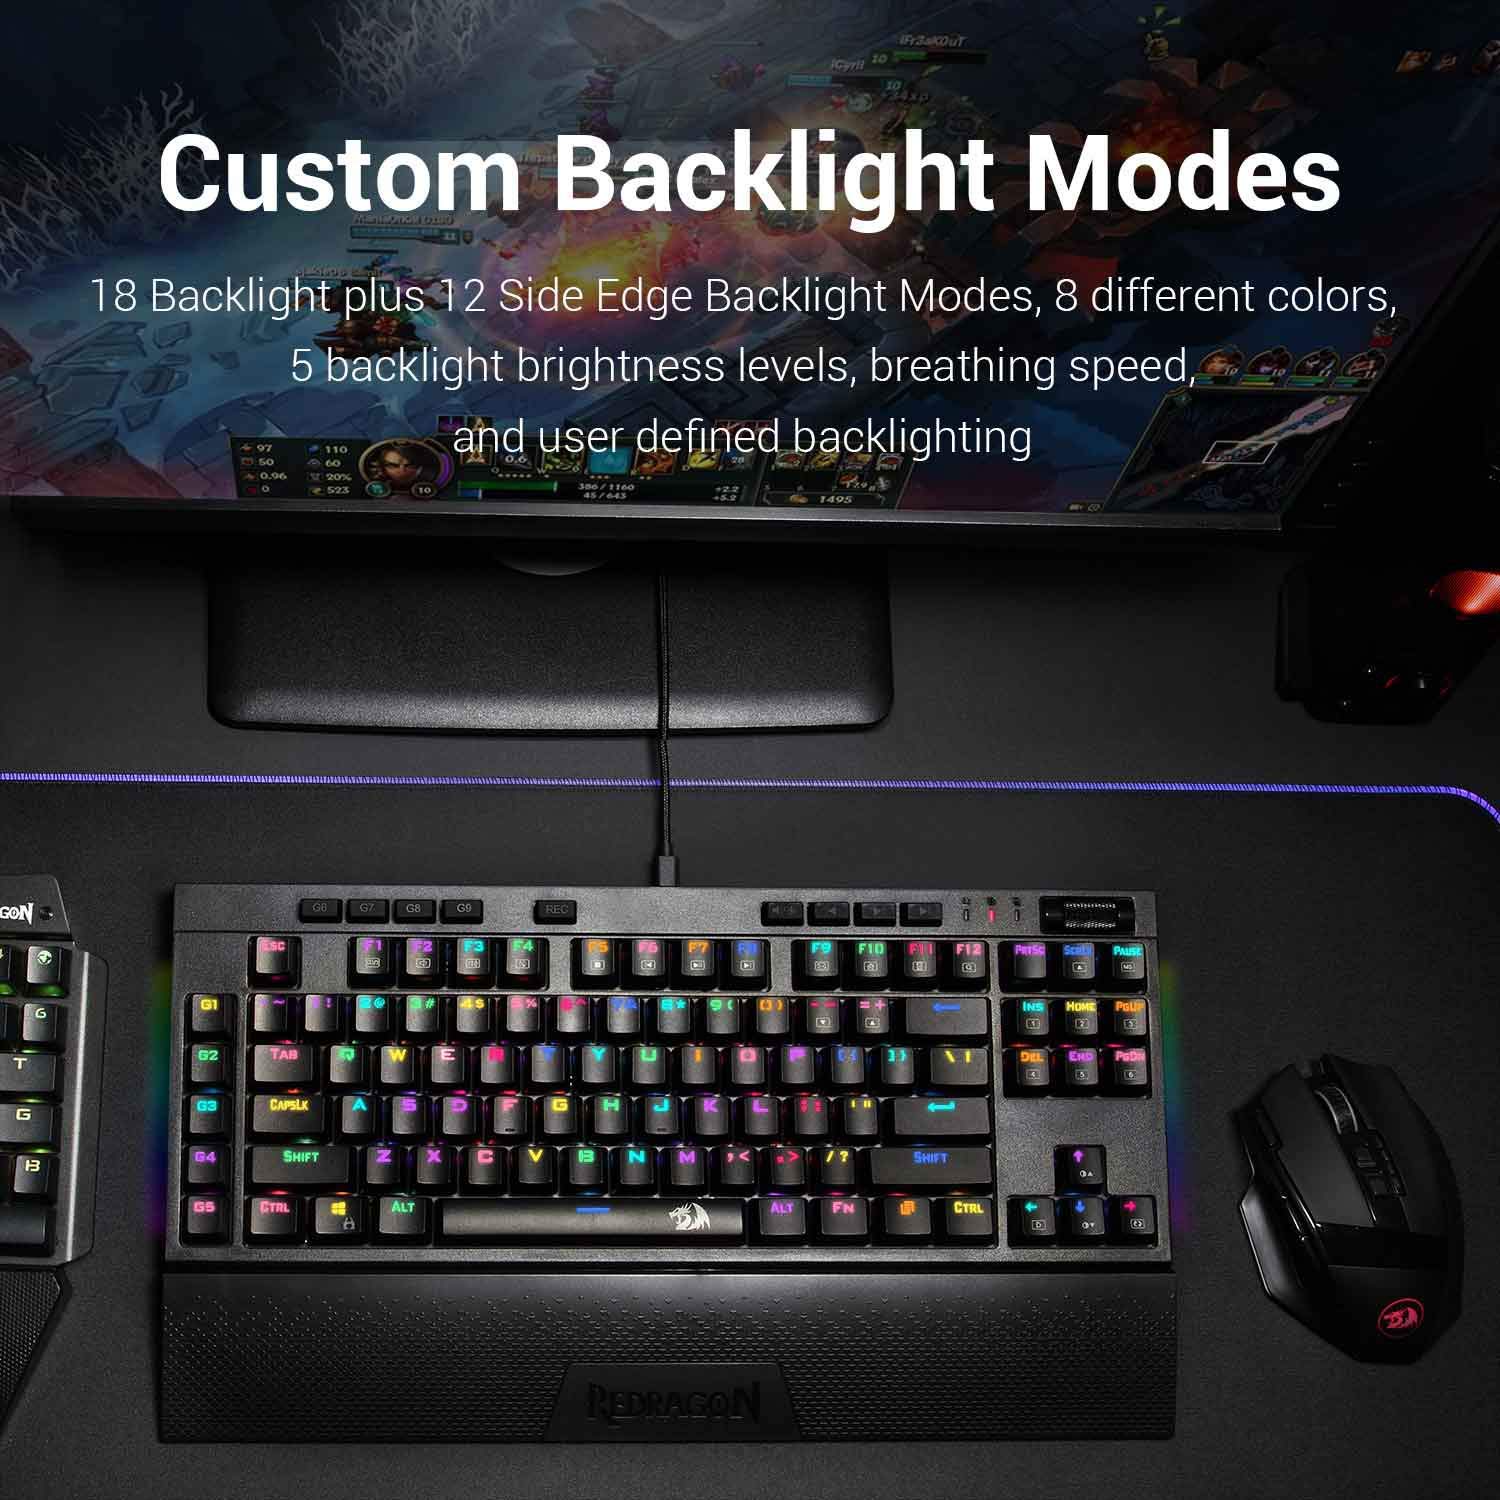 Redragon K588 RGB Backlit Mechanical Gaming Keyboard with Programmable Keys Macro Recording Optical Blue Switches Tenkeyless with Detachable Palm Rest & USB-C USB for Windows PC